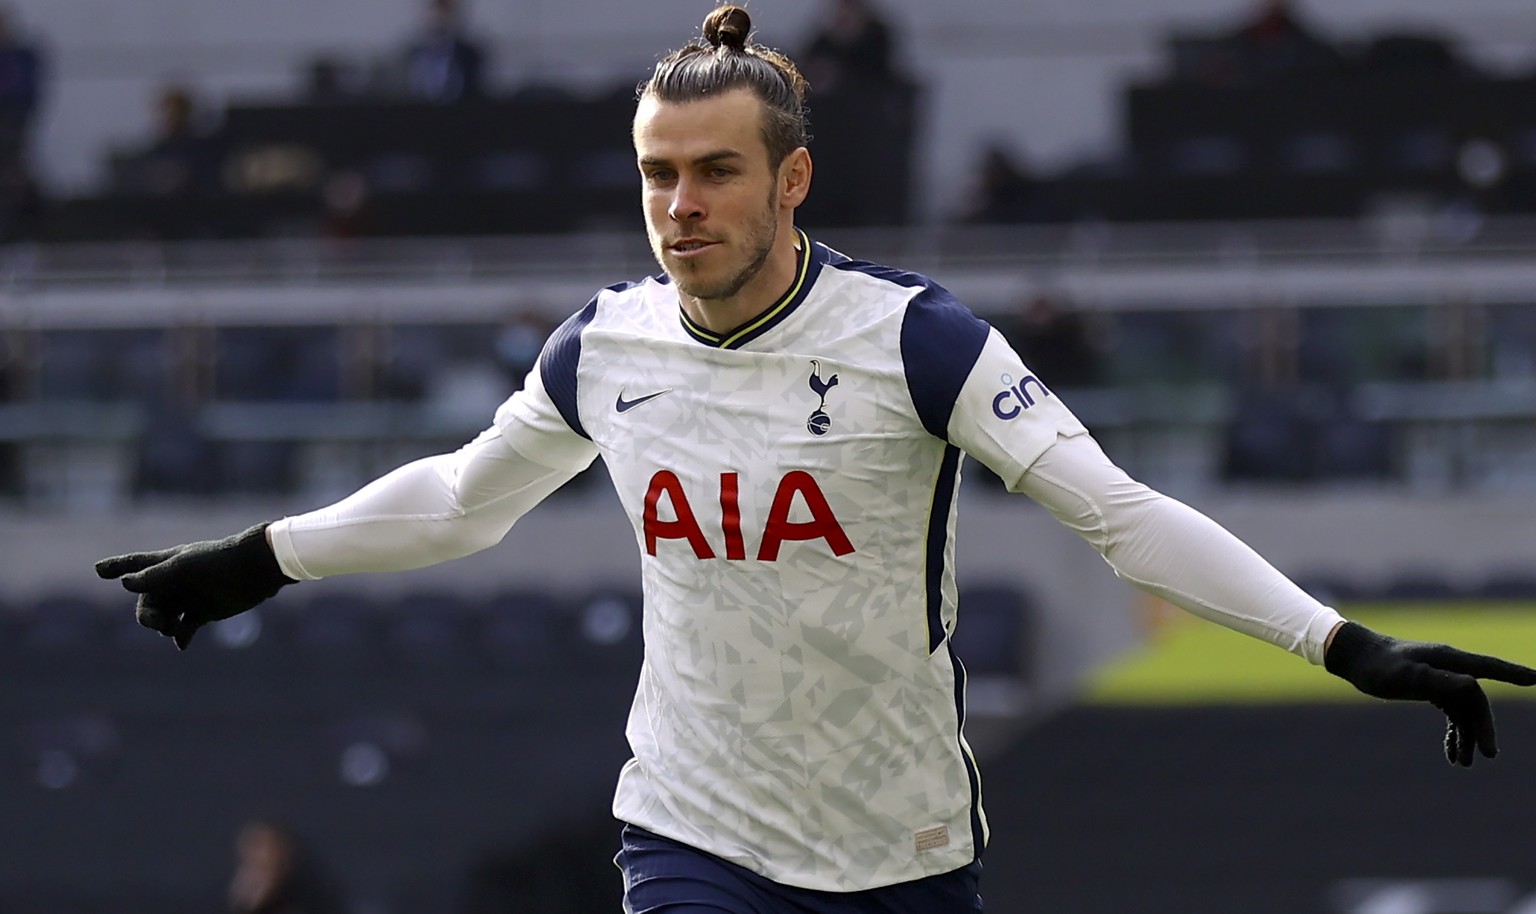 epa09042546 Gareth Bale of Tottenham celebrates after scoring the 1-0 lead during the English Premier League soccer match between Tottenham Hotspur and Burnley FC in London, Britain, 28 February 2021. ...